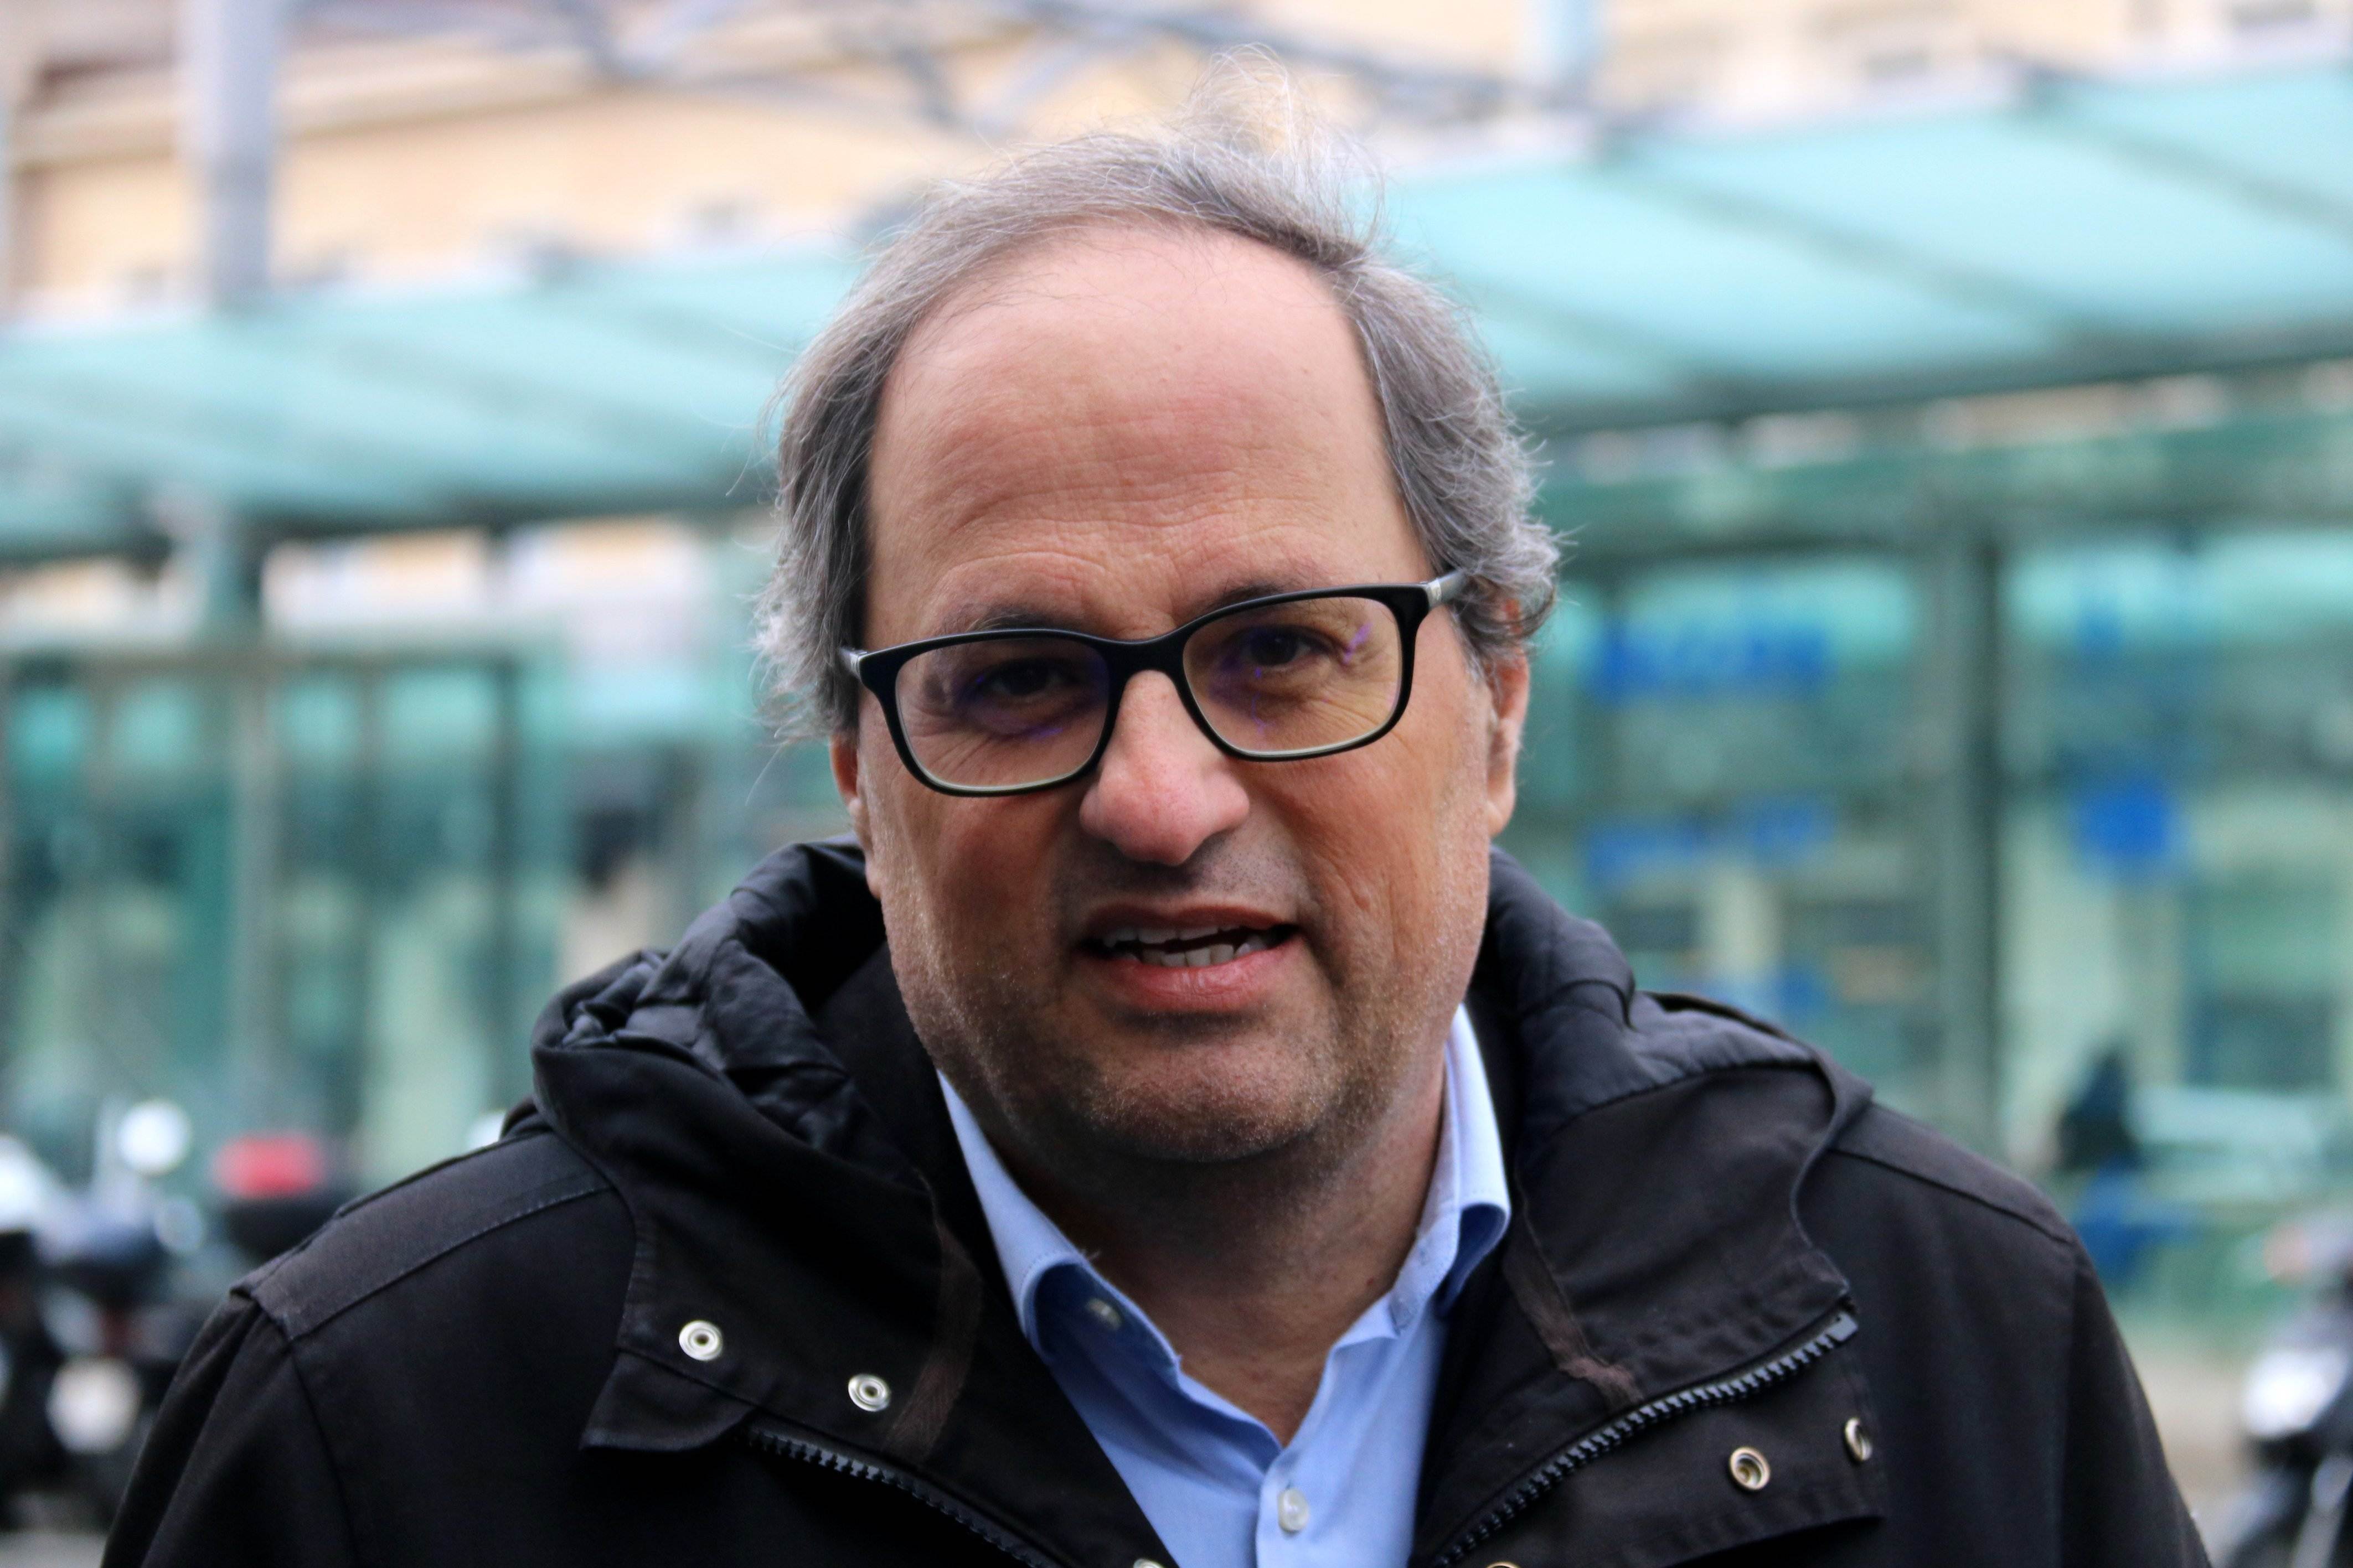 Spanish press alarmed, sees candidate Quim Torra as Puigdemont's "puppet"